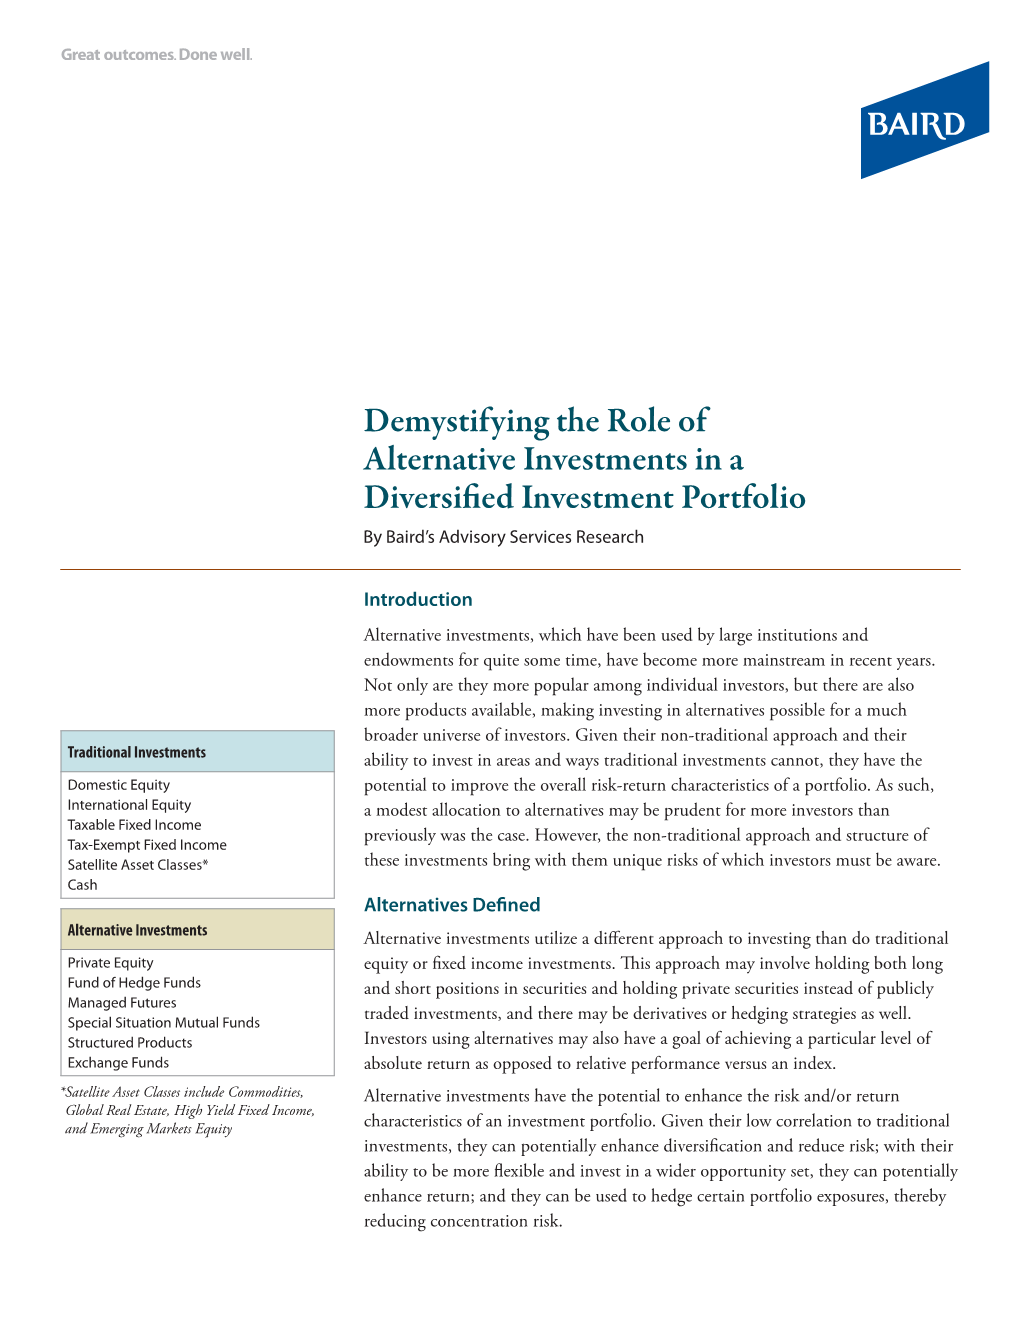 Demystifying the Role of Alternative Investments in a Diversified Investment Portfolio by Baird’S Advisory Services Research